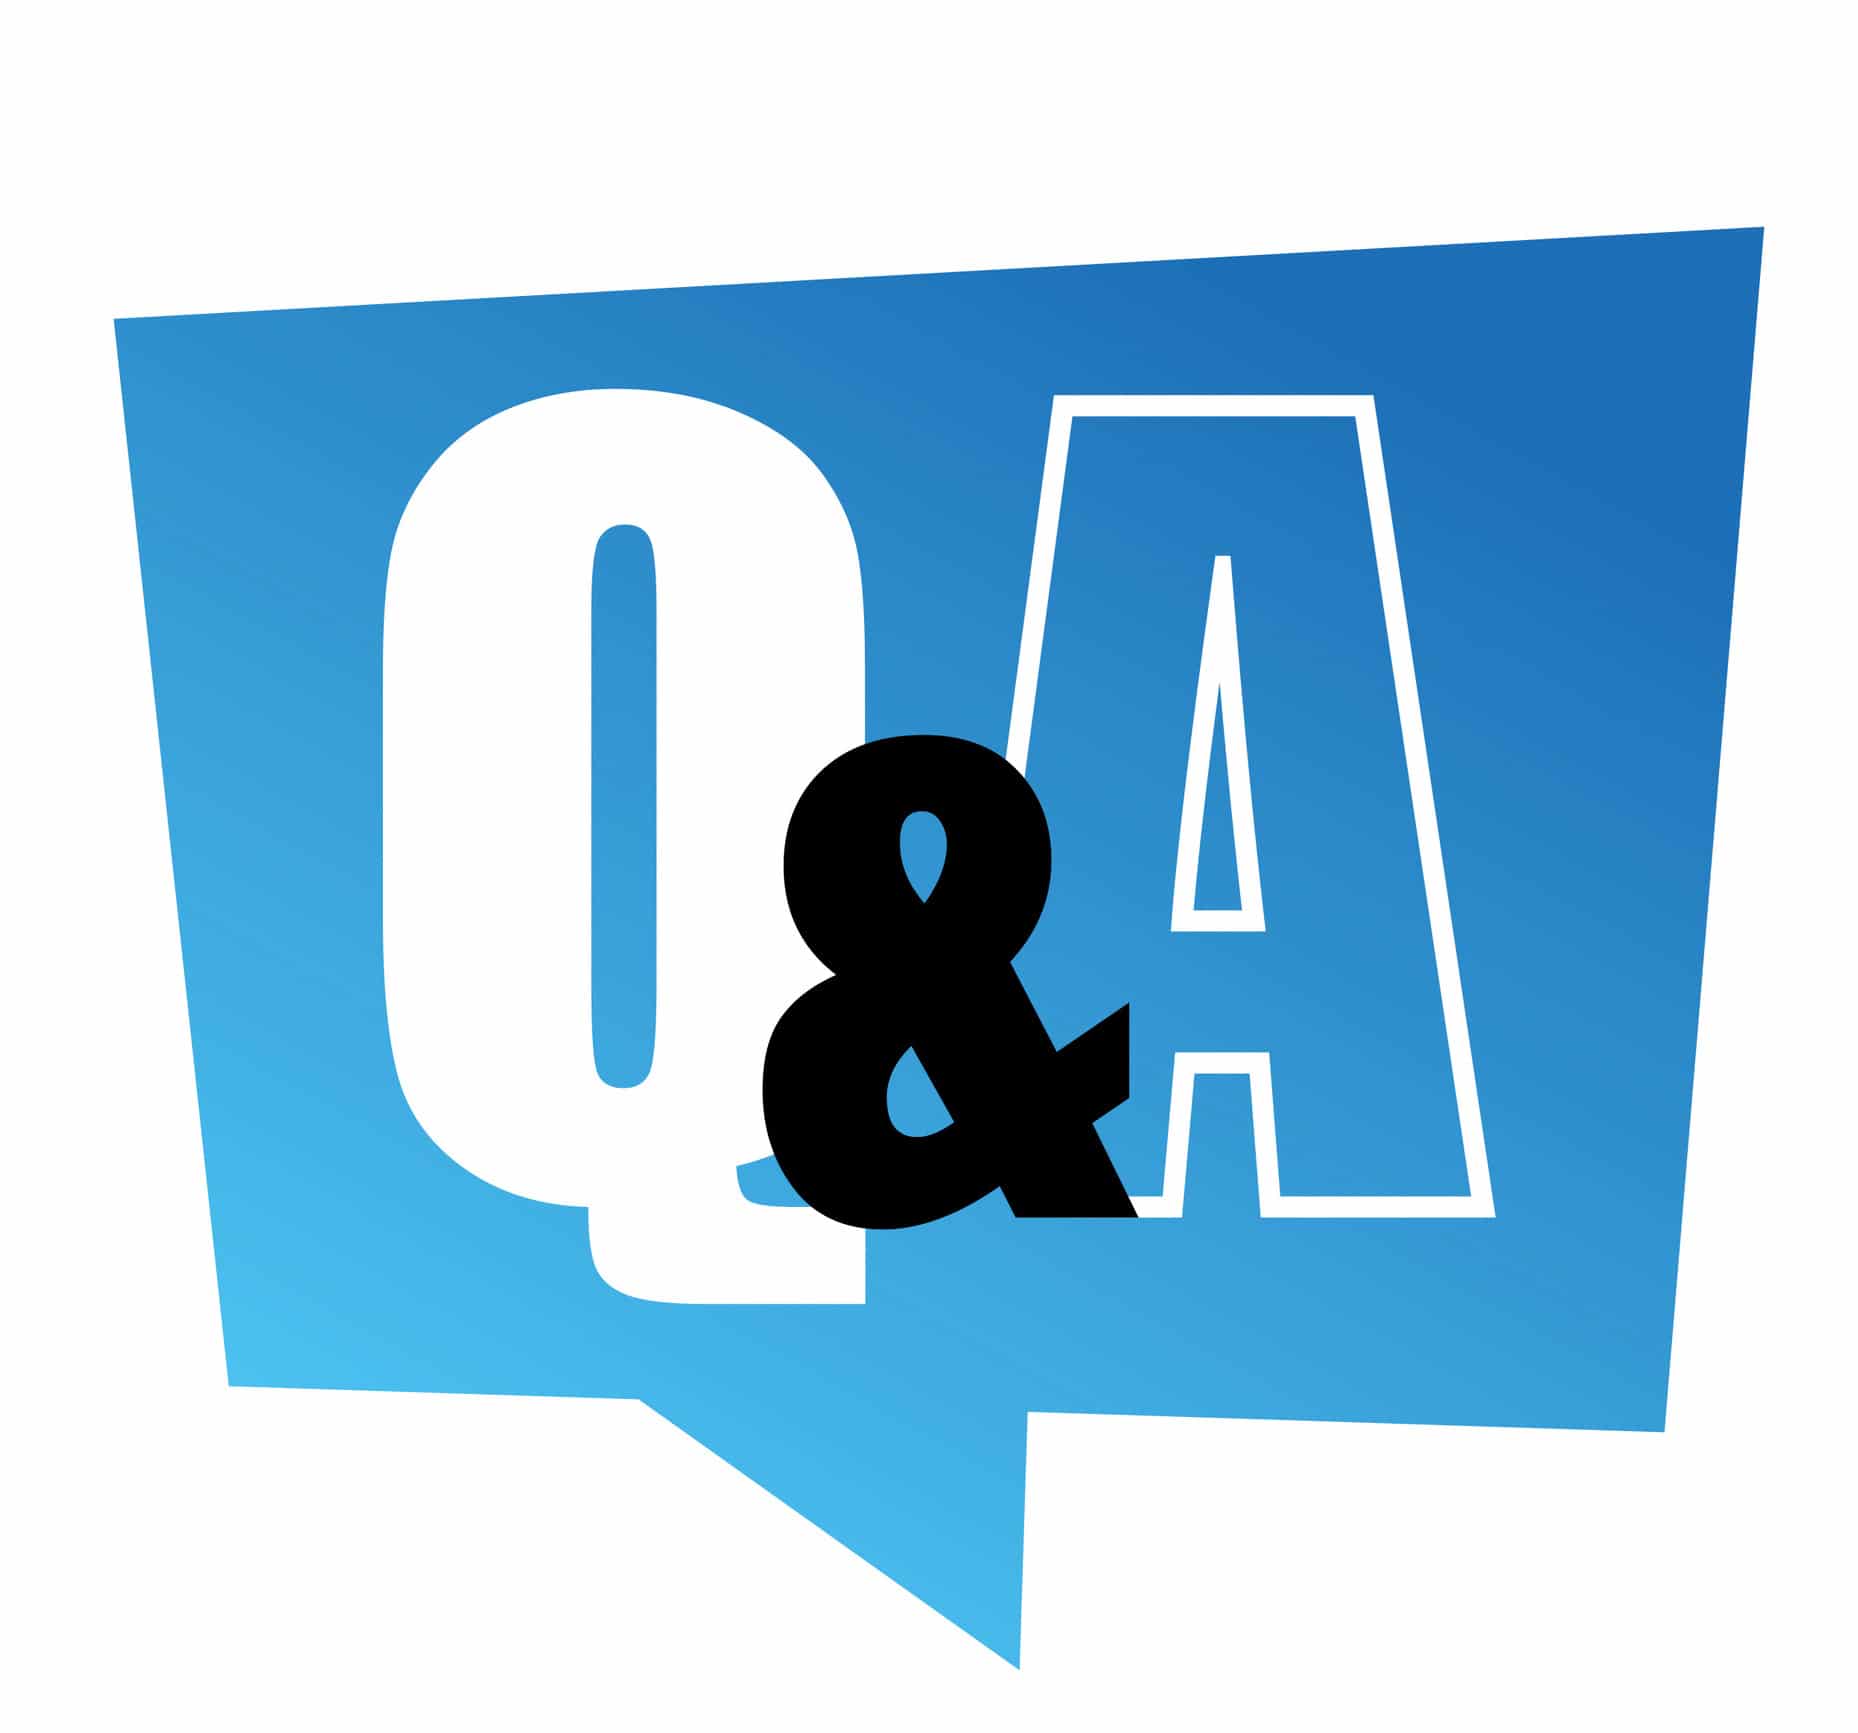 Q&A small business inflation